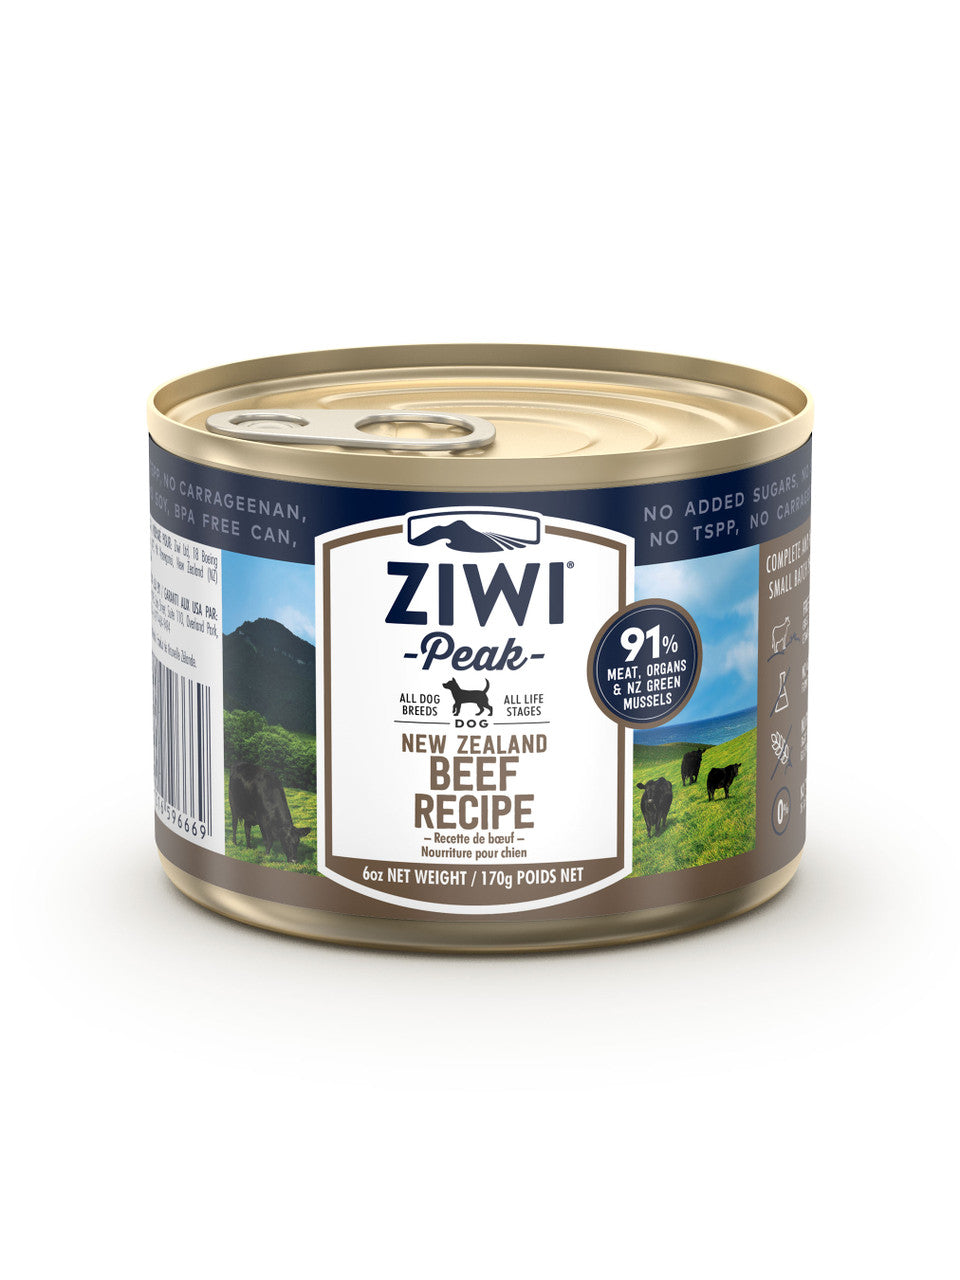 A can of ZIWI Peak Beef Recipe for Dogs by Your Whole Dog.